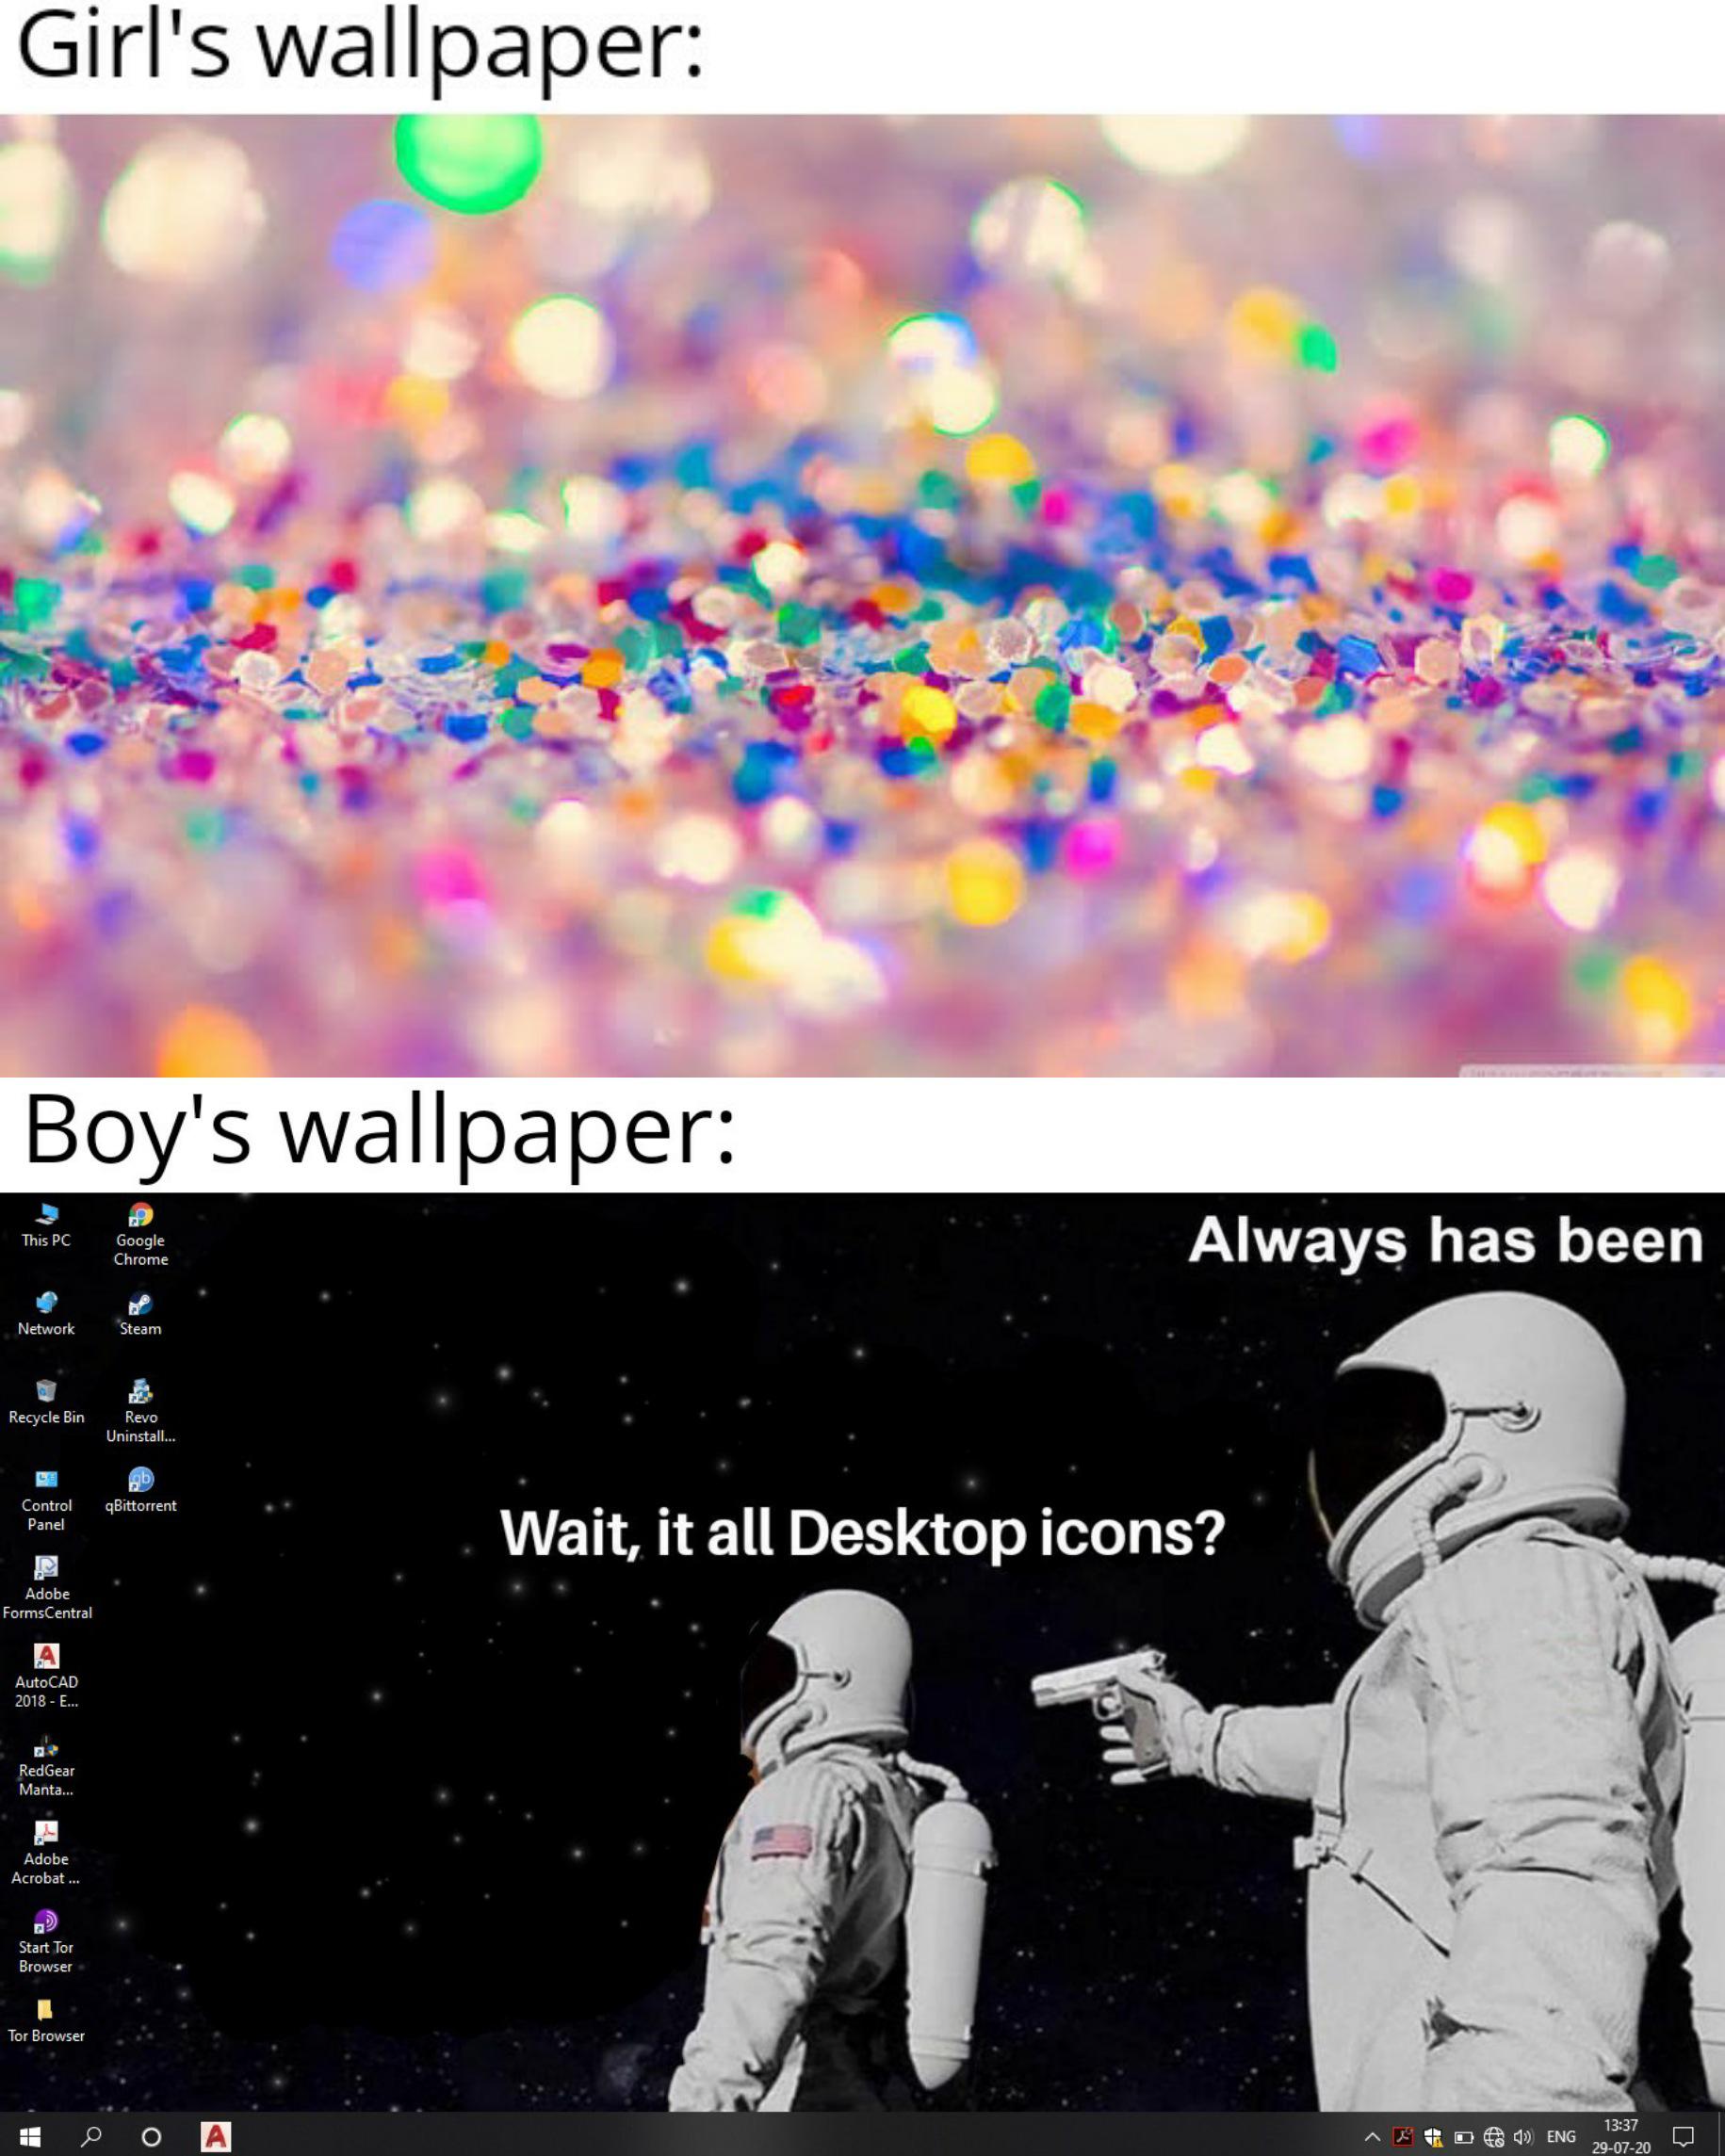 reddit dank memes 2020 - glitter background free - Girl's wallpaper Boy's wallpaper This Pc Google Chrome Always has been Network Steam Recycle Bin Revo Uninstall... Control Panel qBittorrent Wait, it all Desktop icons? Adobe FormsCentral A AutoCAD 2018 E